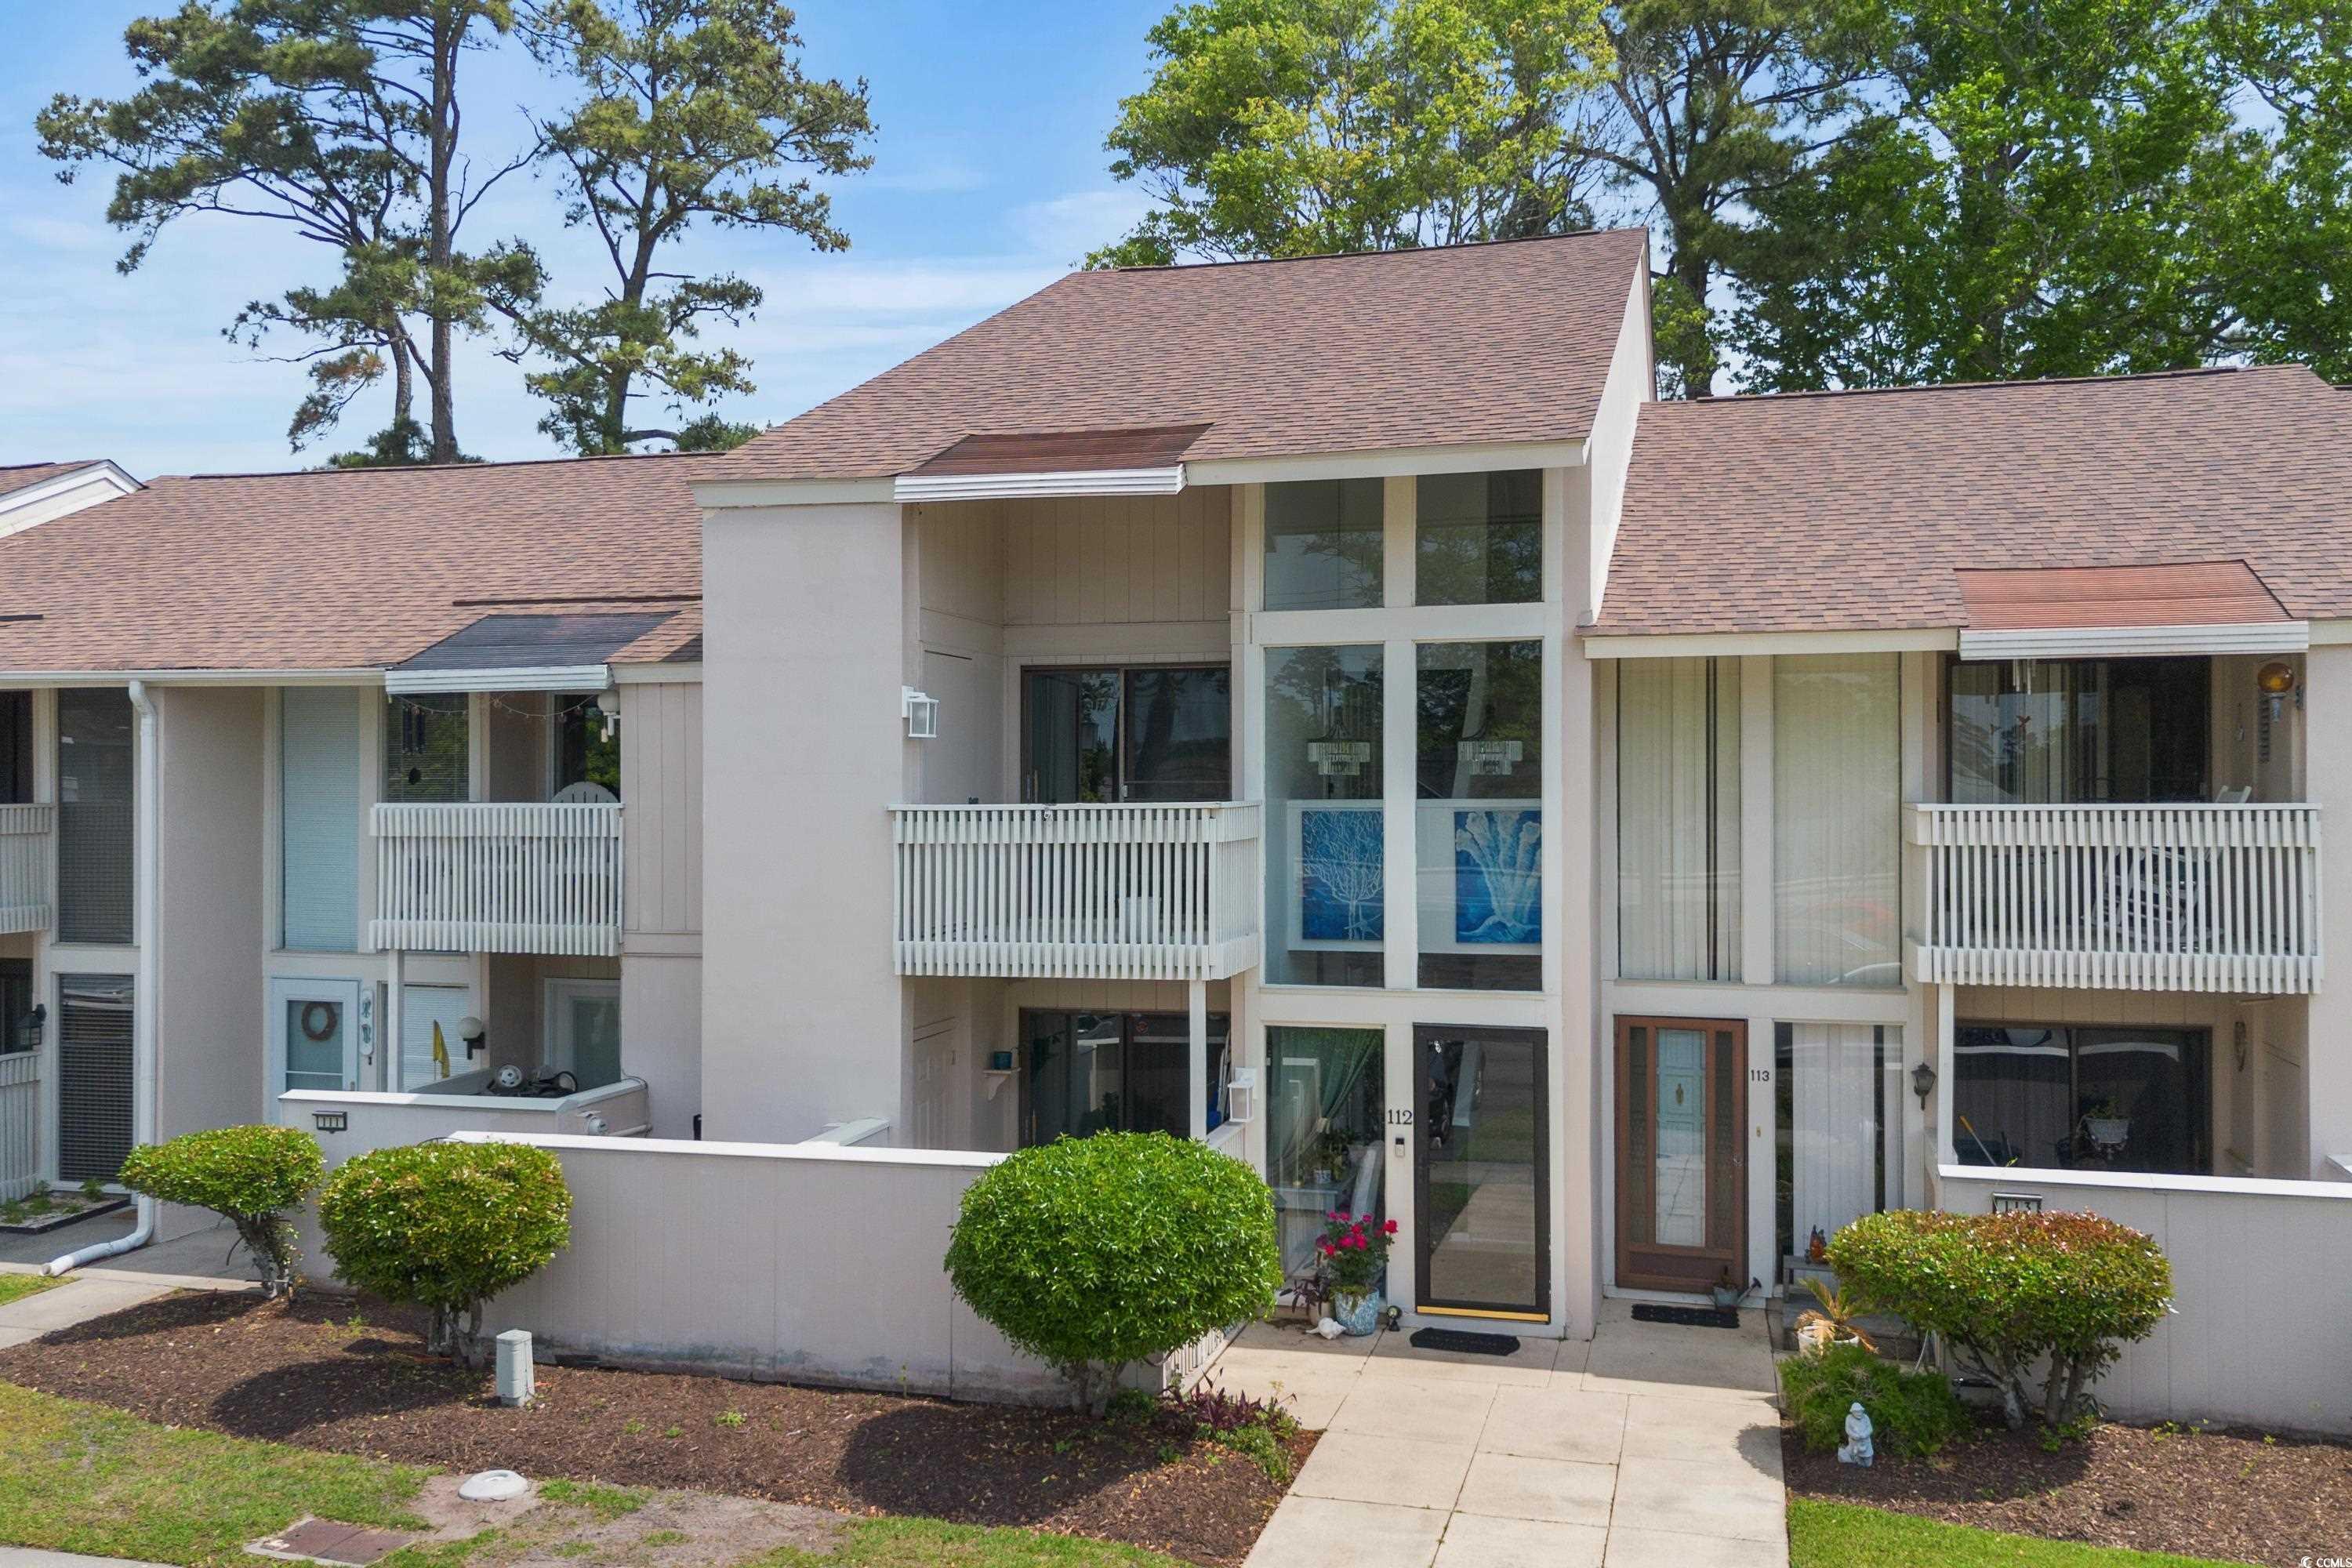 Photo one of 1000 11Th Ave. N # 112 North Myrtle Beach SC 29582 | MLS 2409206